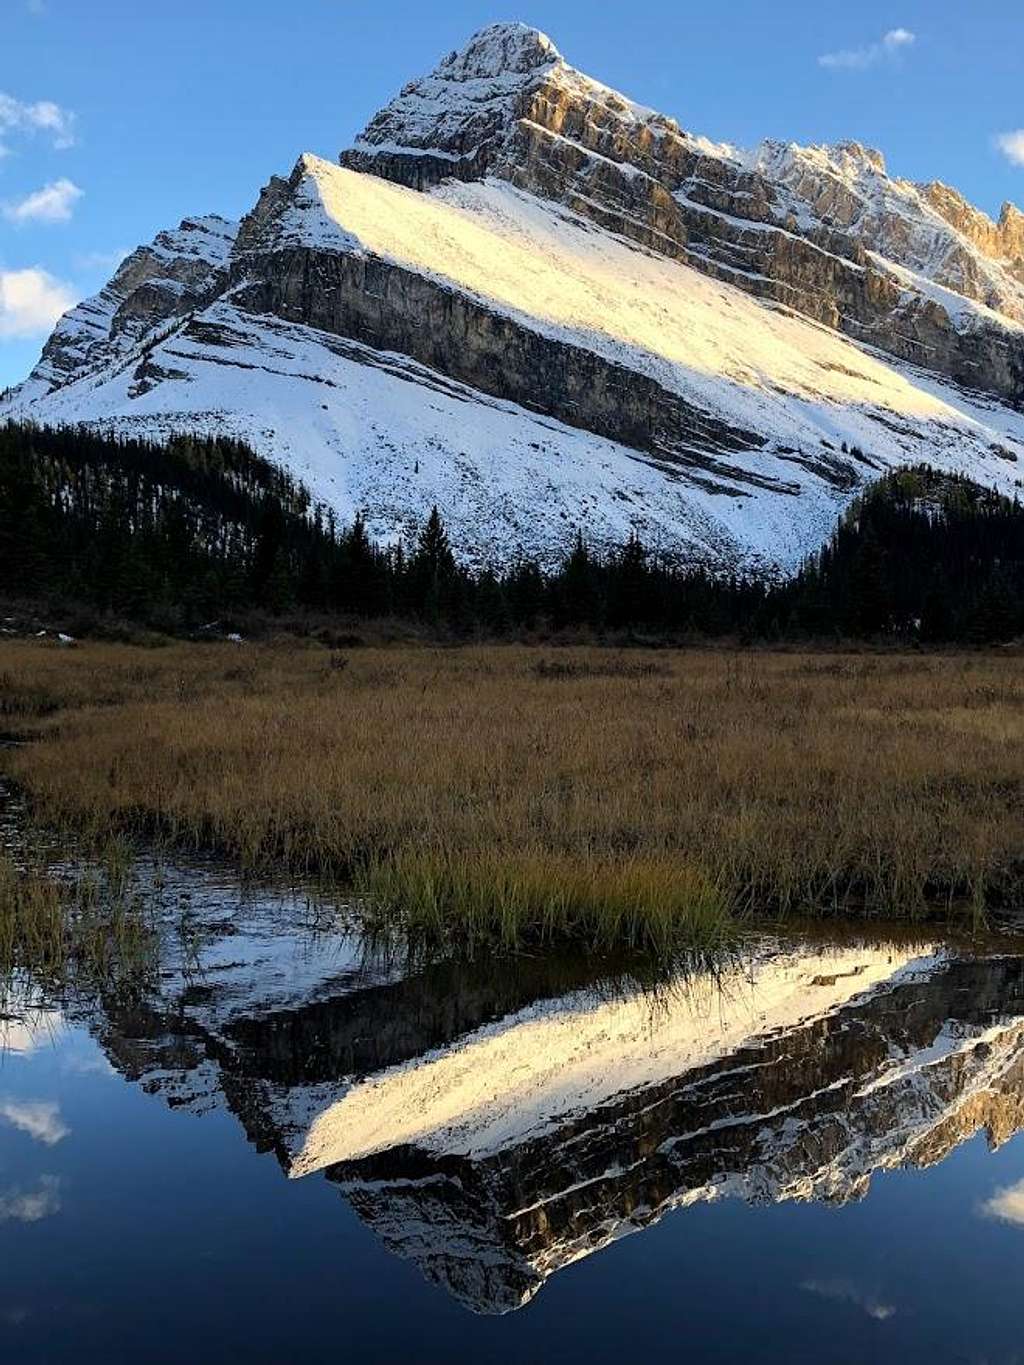 Fall views in the Canadian Rockies